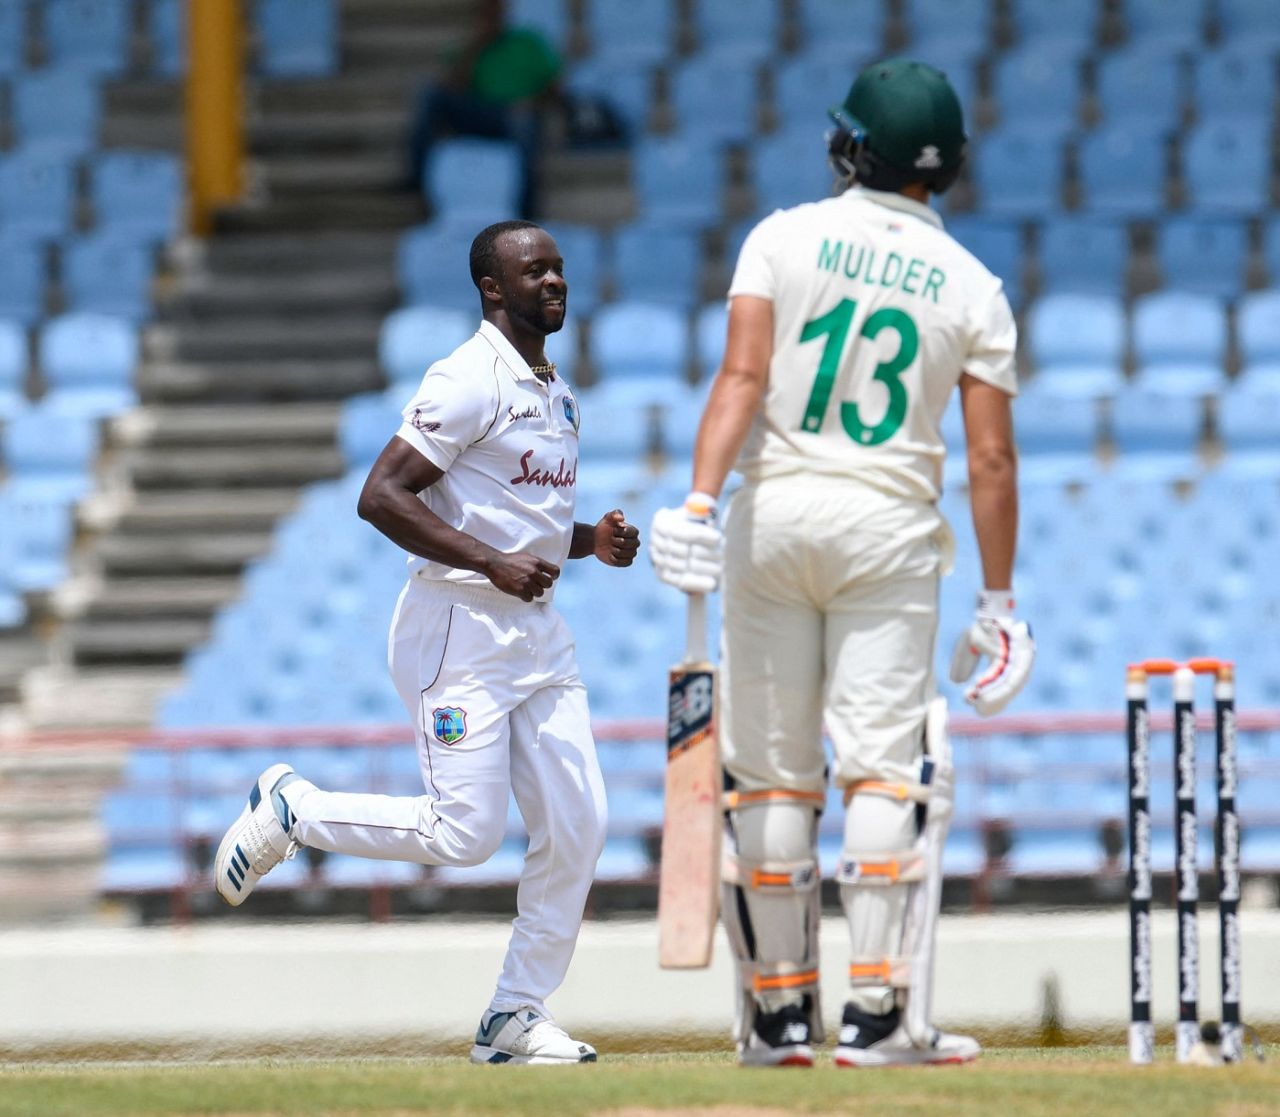 Kemar Roach removed Wiaan Mulder for the first wicket of the day, West Indies vs South Africa, 2nd Test, Gros Islet, 2nd day, June 19, 2021